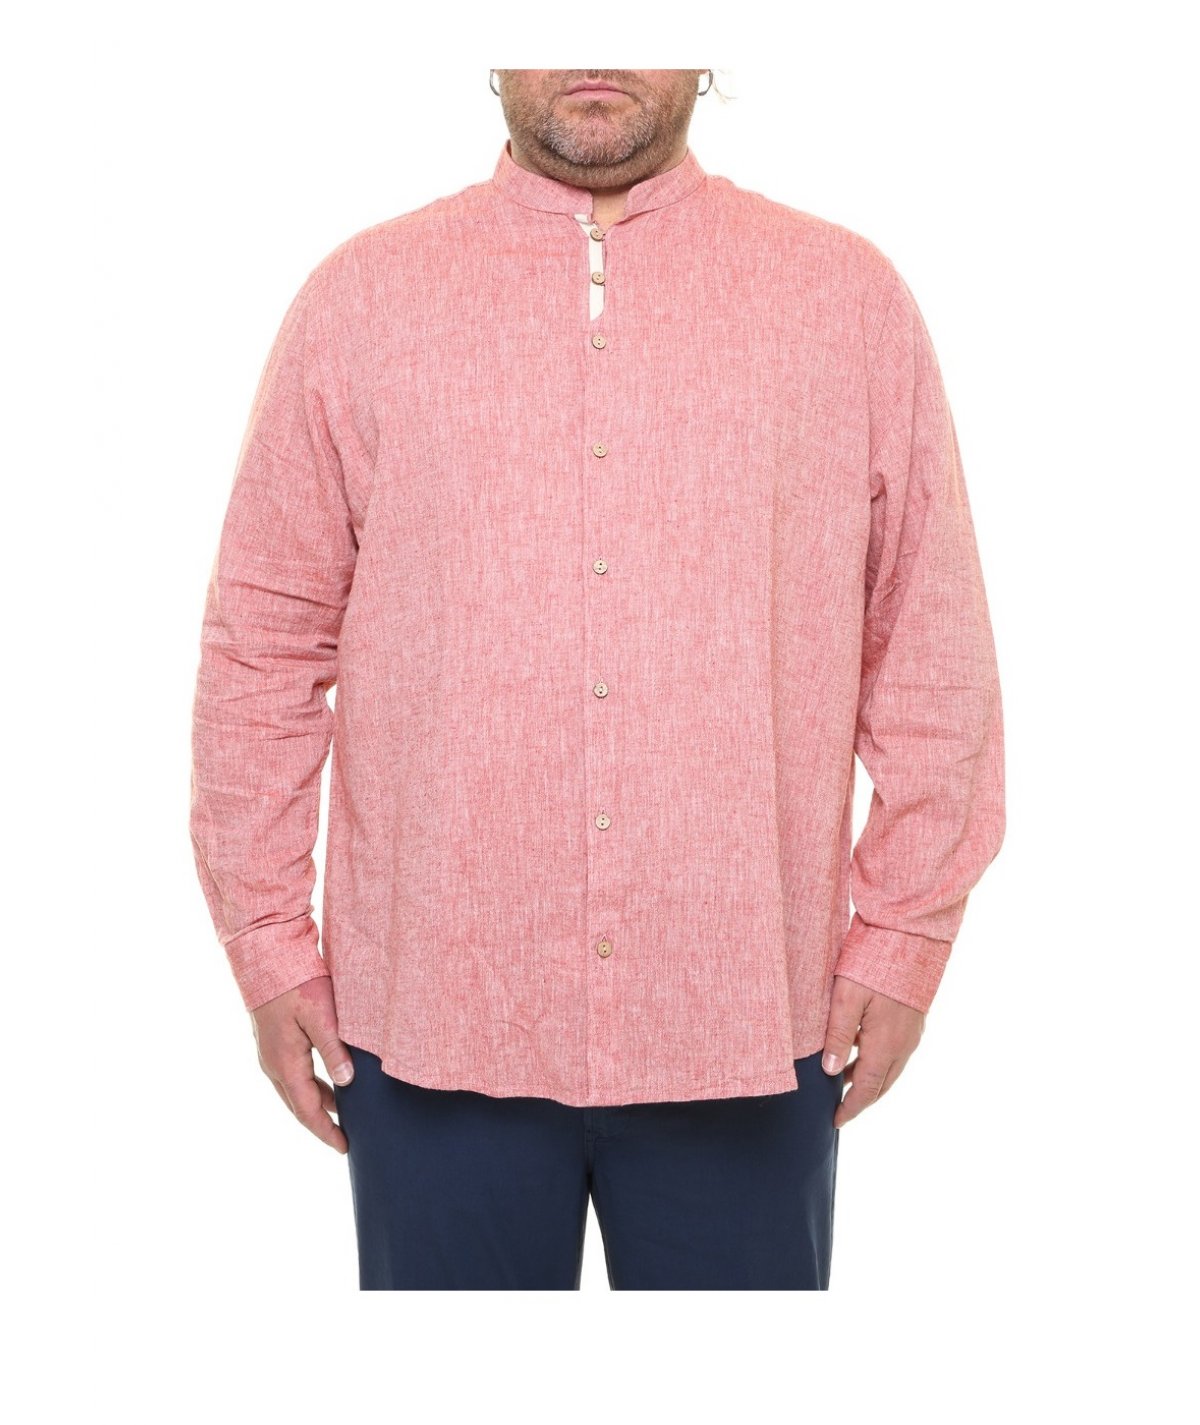 MAXFORT AGROPOLI PLUS SIZES LINEN SHIRT FOR BIG AND TALL MEN